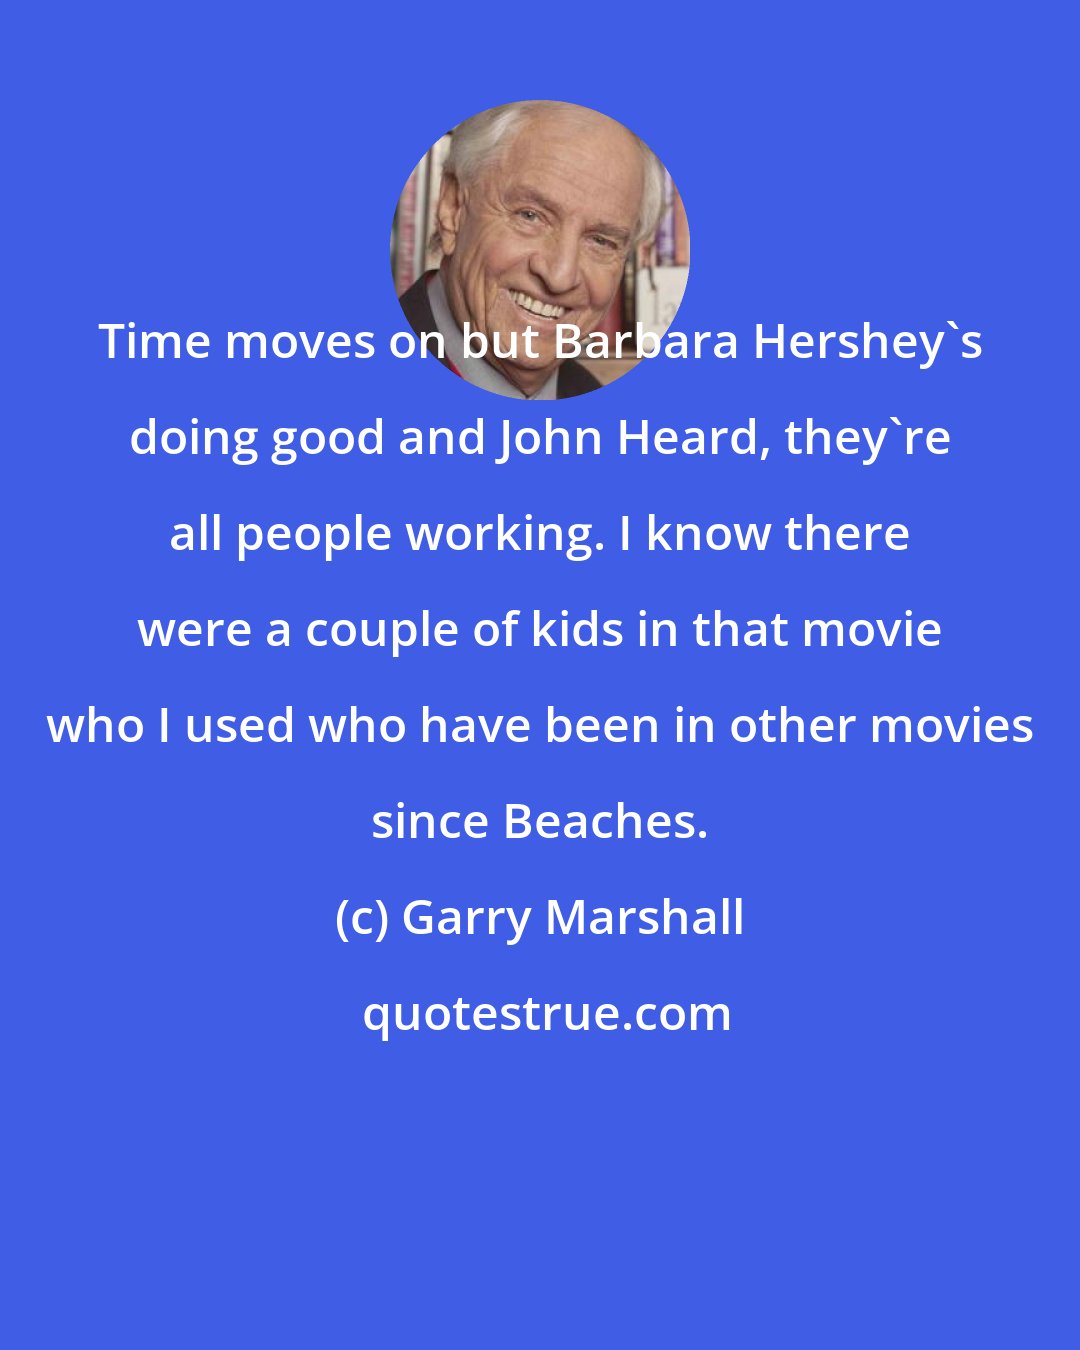 Garry Marshall: Time moves on but Barbara Hershey's doing good and John Heard, they're all people working. I know there were a couple of kids in that movie who I used who have been in other movies since Beaches.